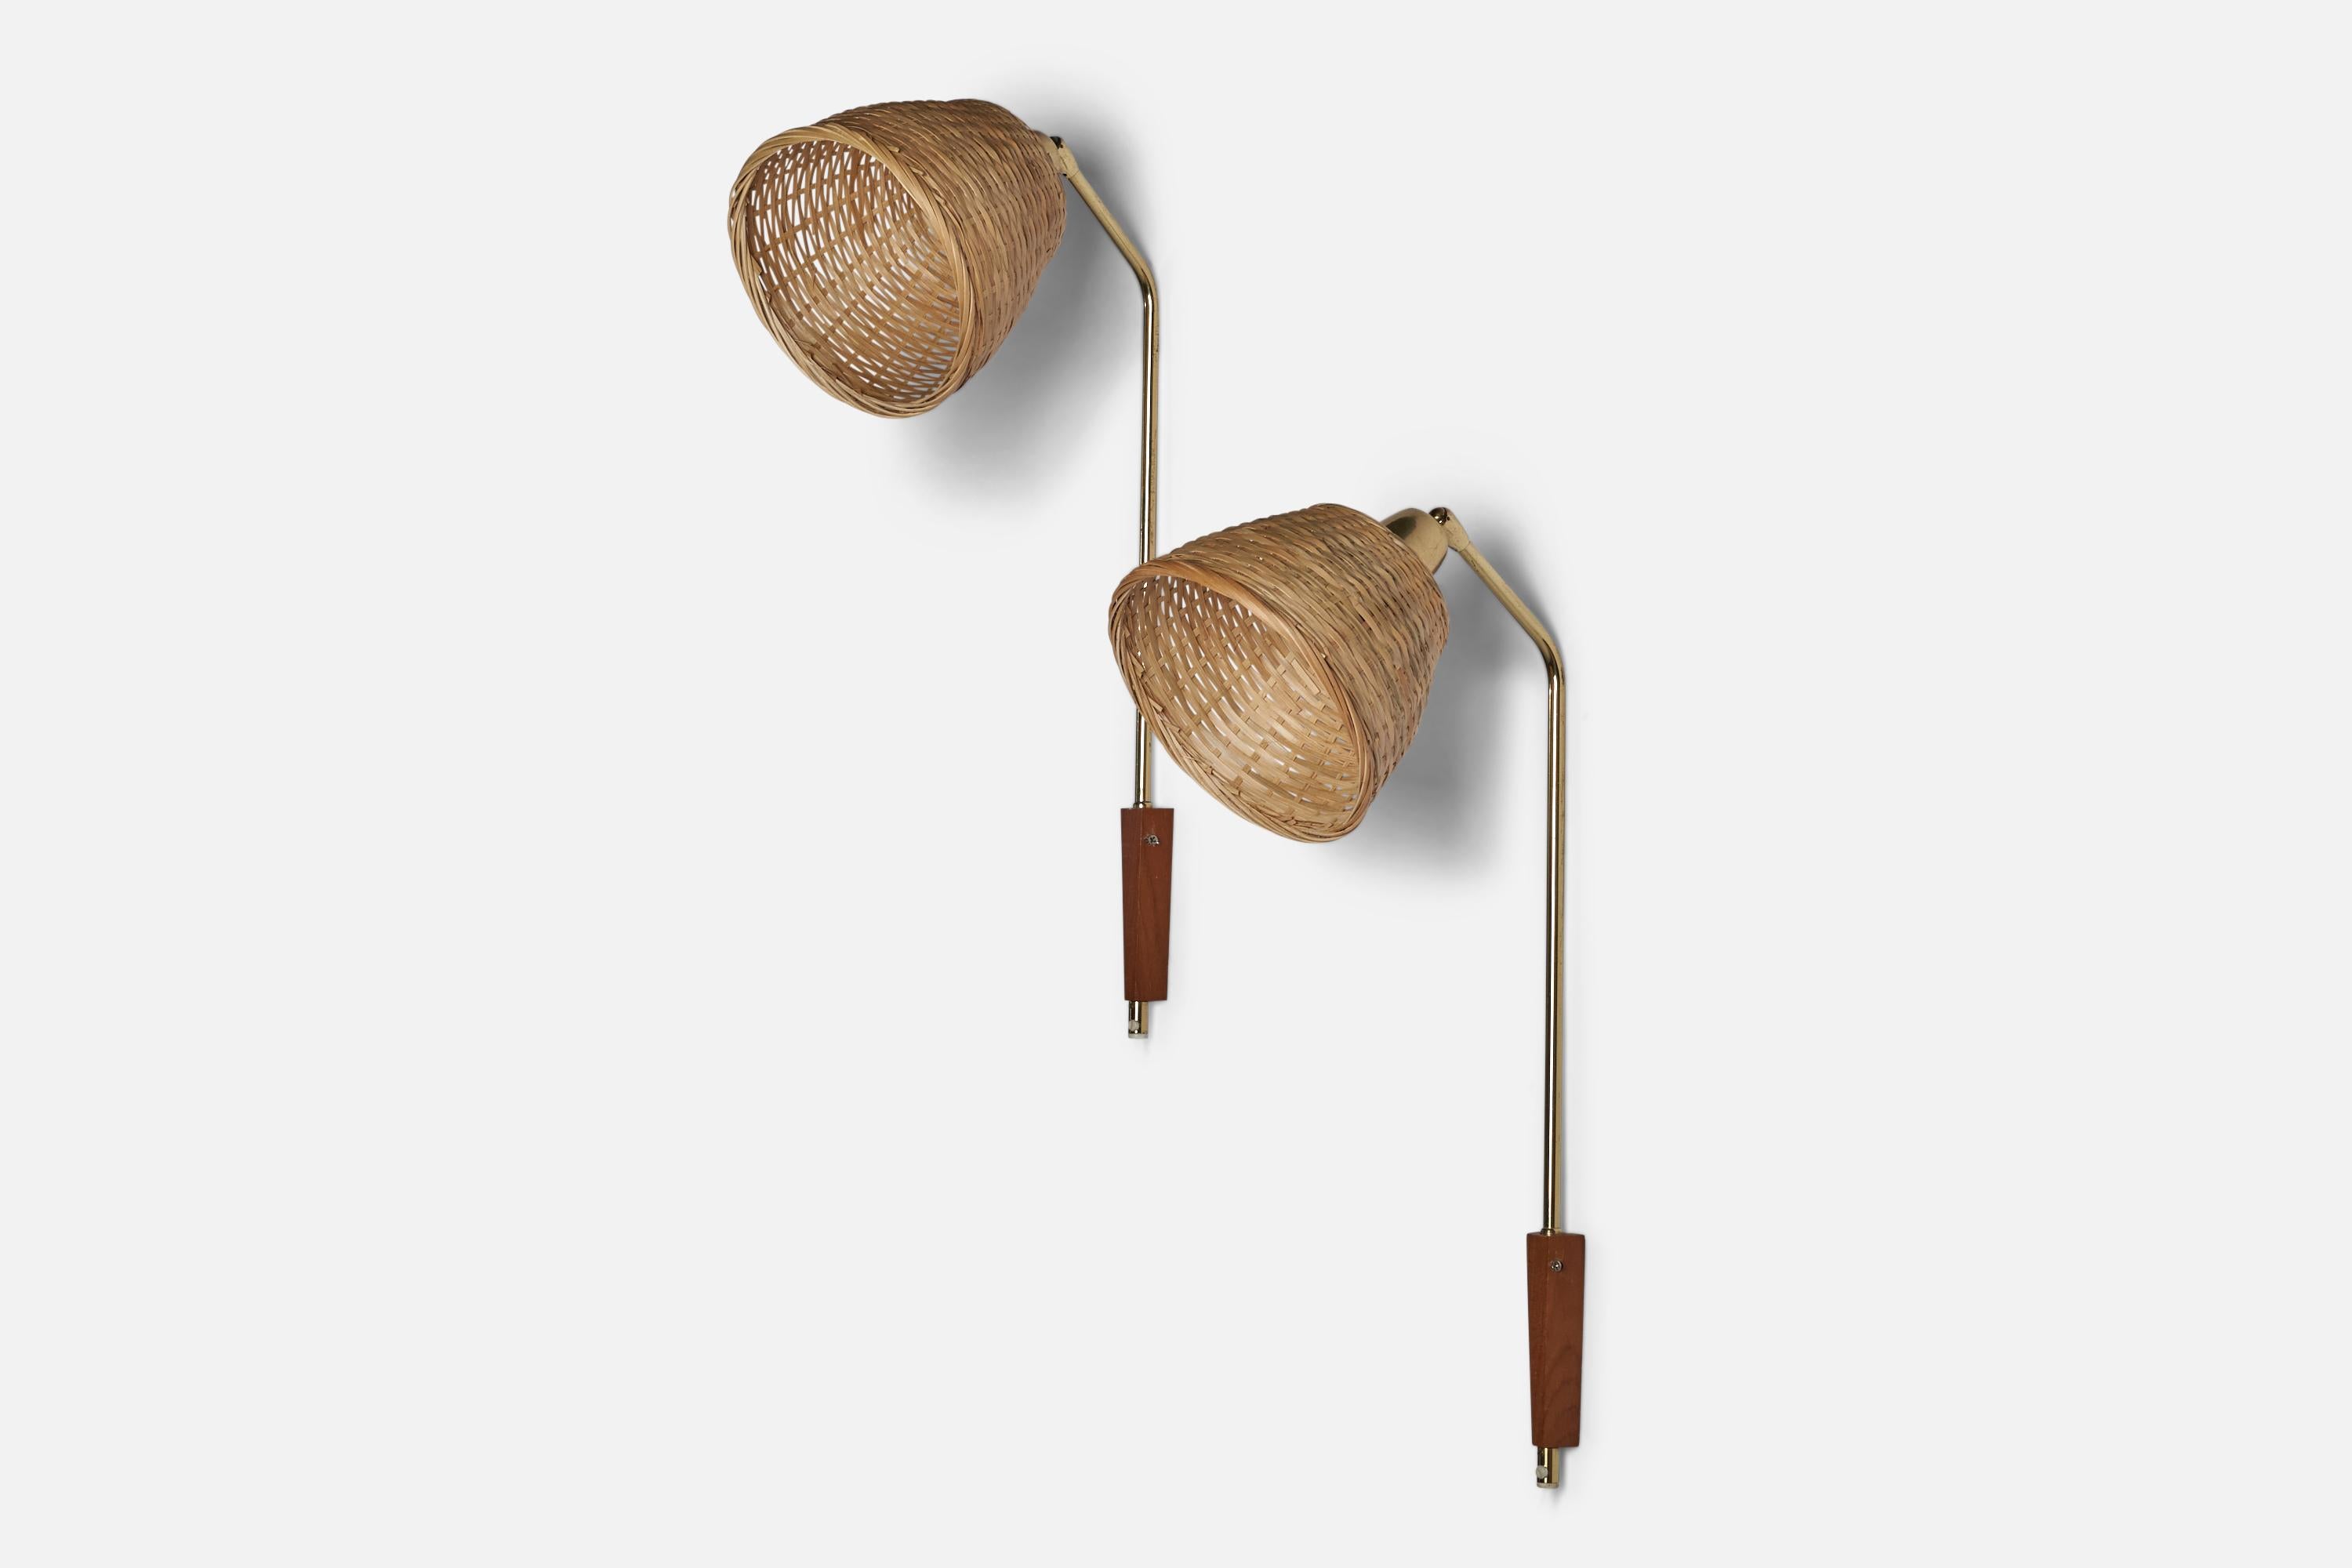 A pair of brass, rattan and teak wall lights designed and produced in Sweden, c. 1960s.

Overall Dimensions (inches): 26” H x 7” W x 11.5” D
Back Plate Dimensions (inches): 4.5” H x 1.25” W x 0.8” D
Bulb Specifications: E-26 Bulb
Number of Sockets: